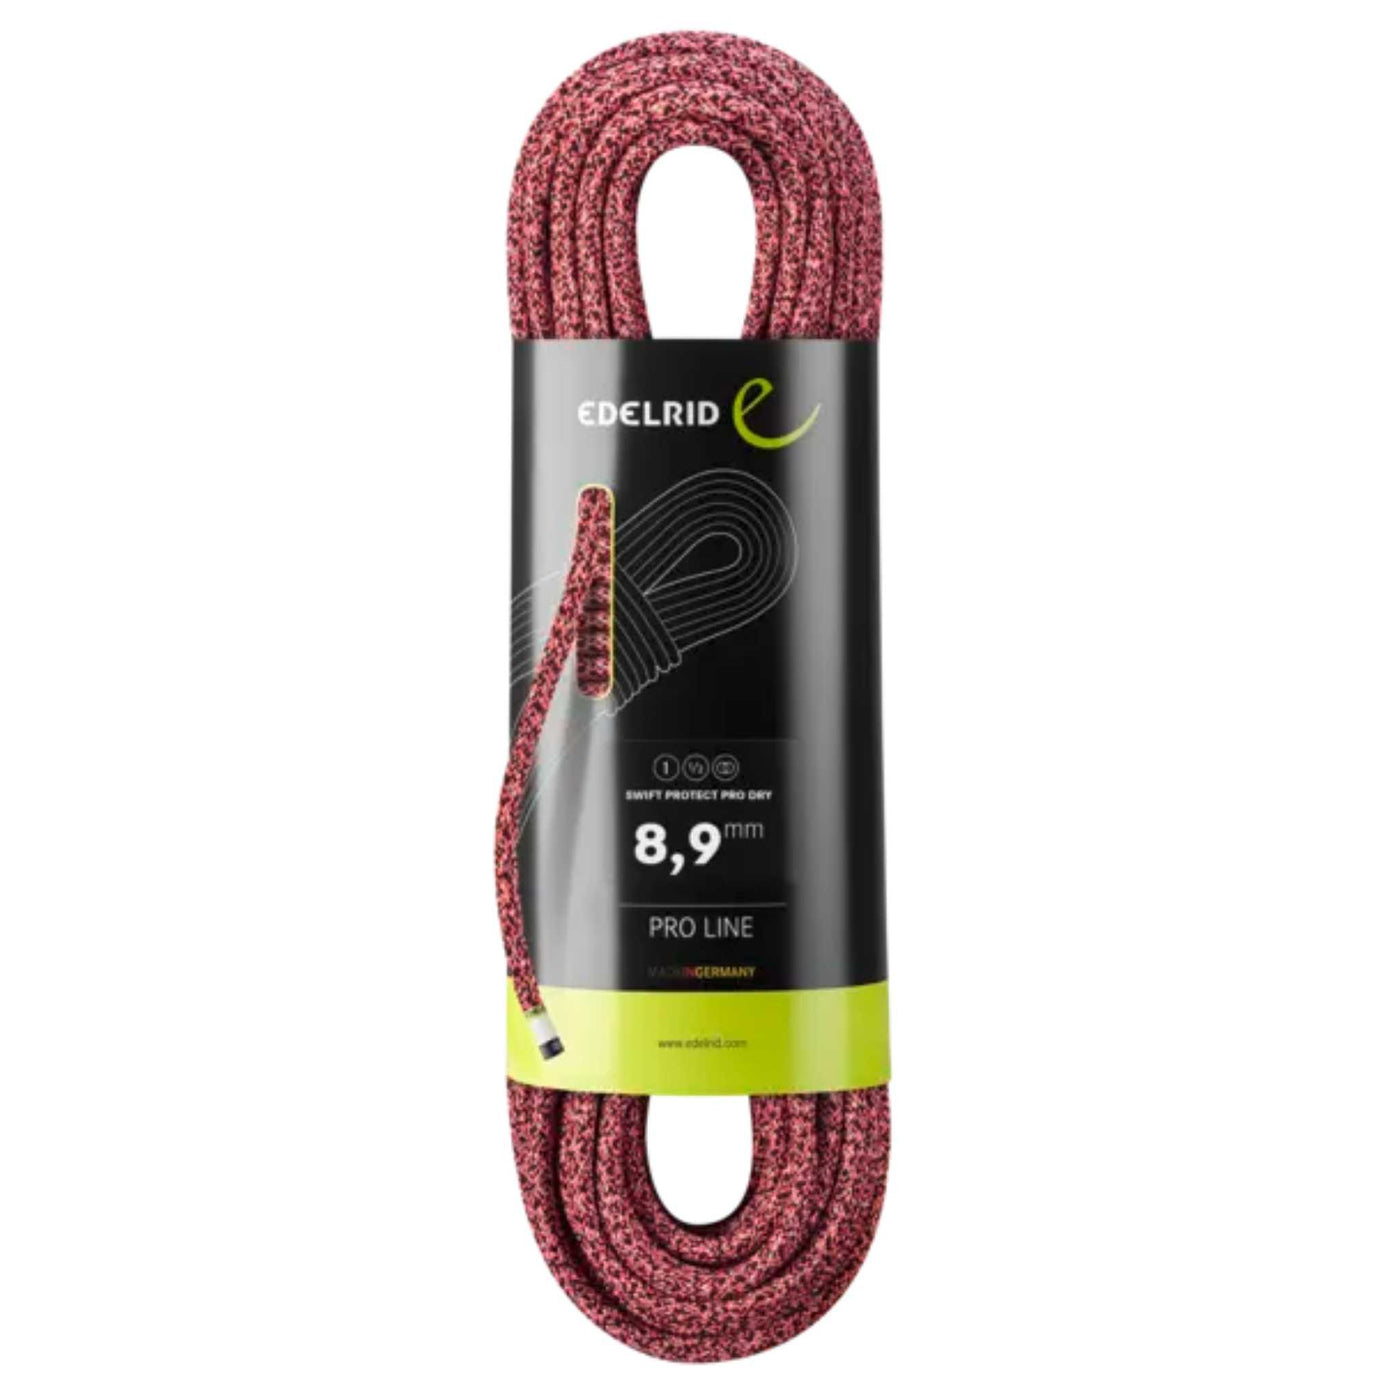 Edelrid Swift Protect Pro Line Dry Rope 8.9mm - 60m | Climbing Rope NZ | Further Faster Christchurch NZ #night-fire